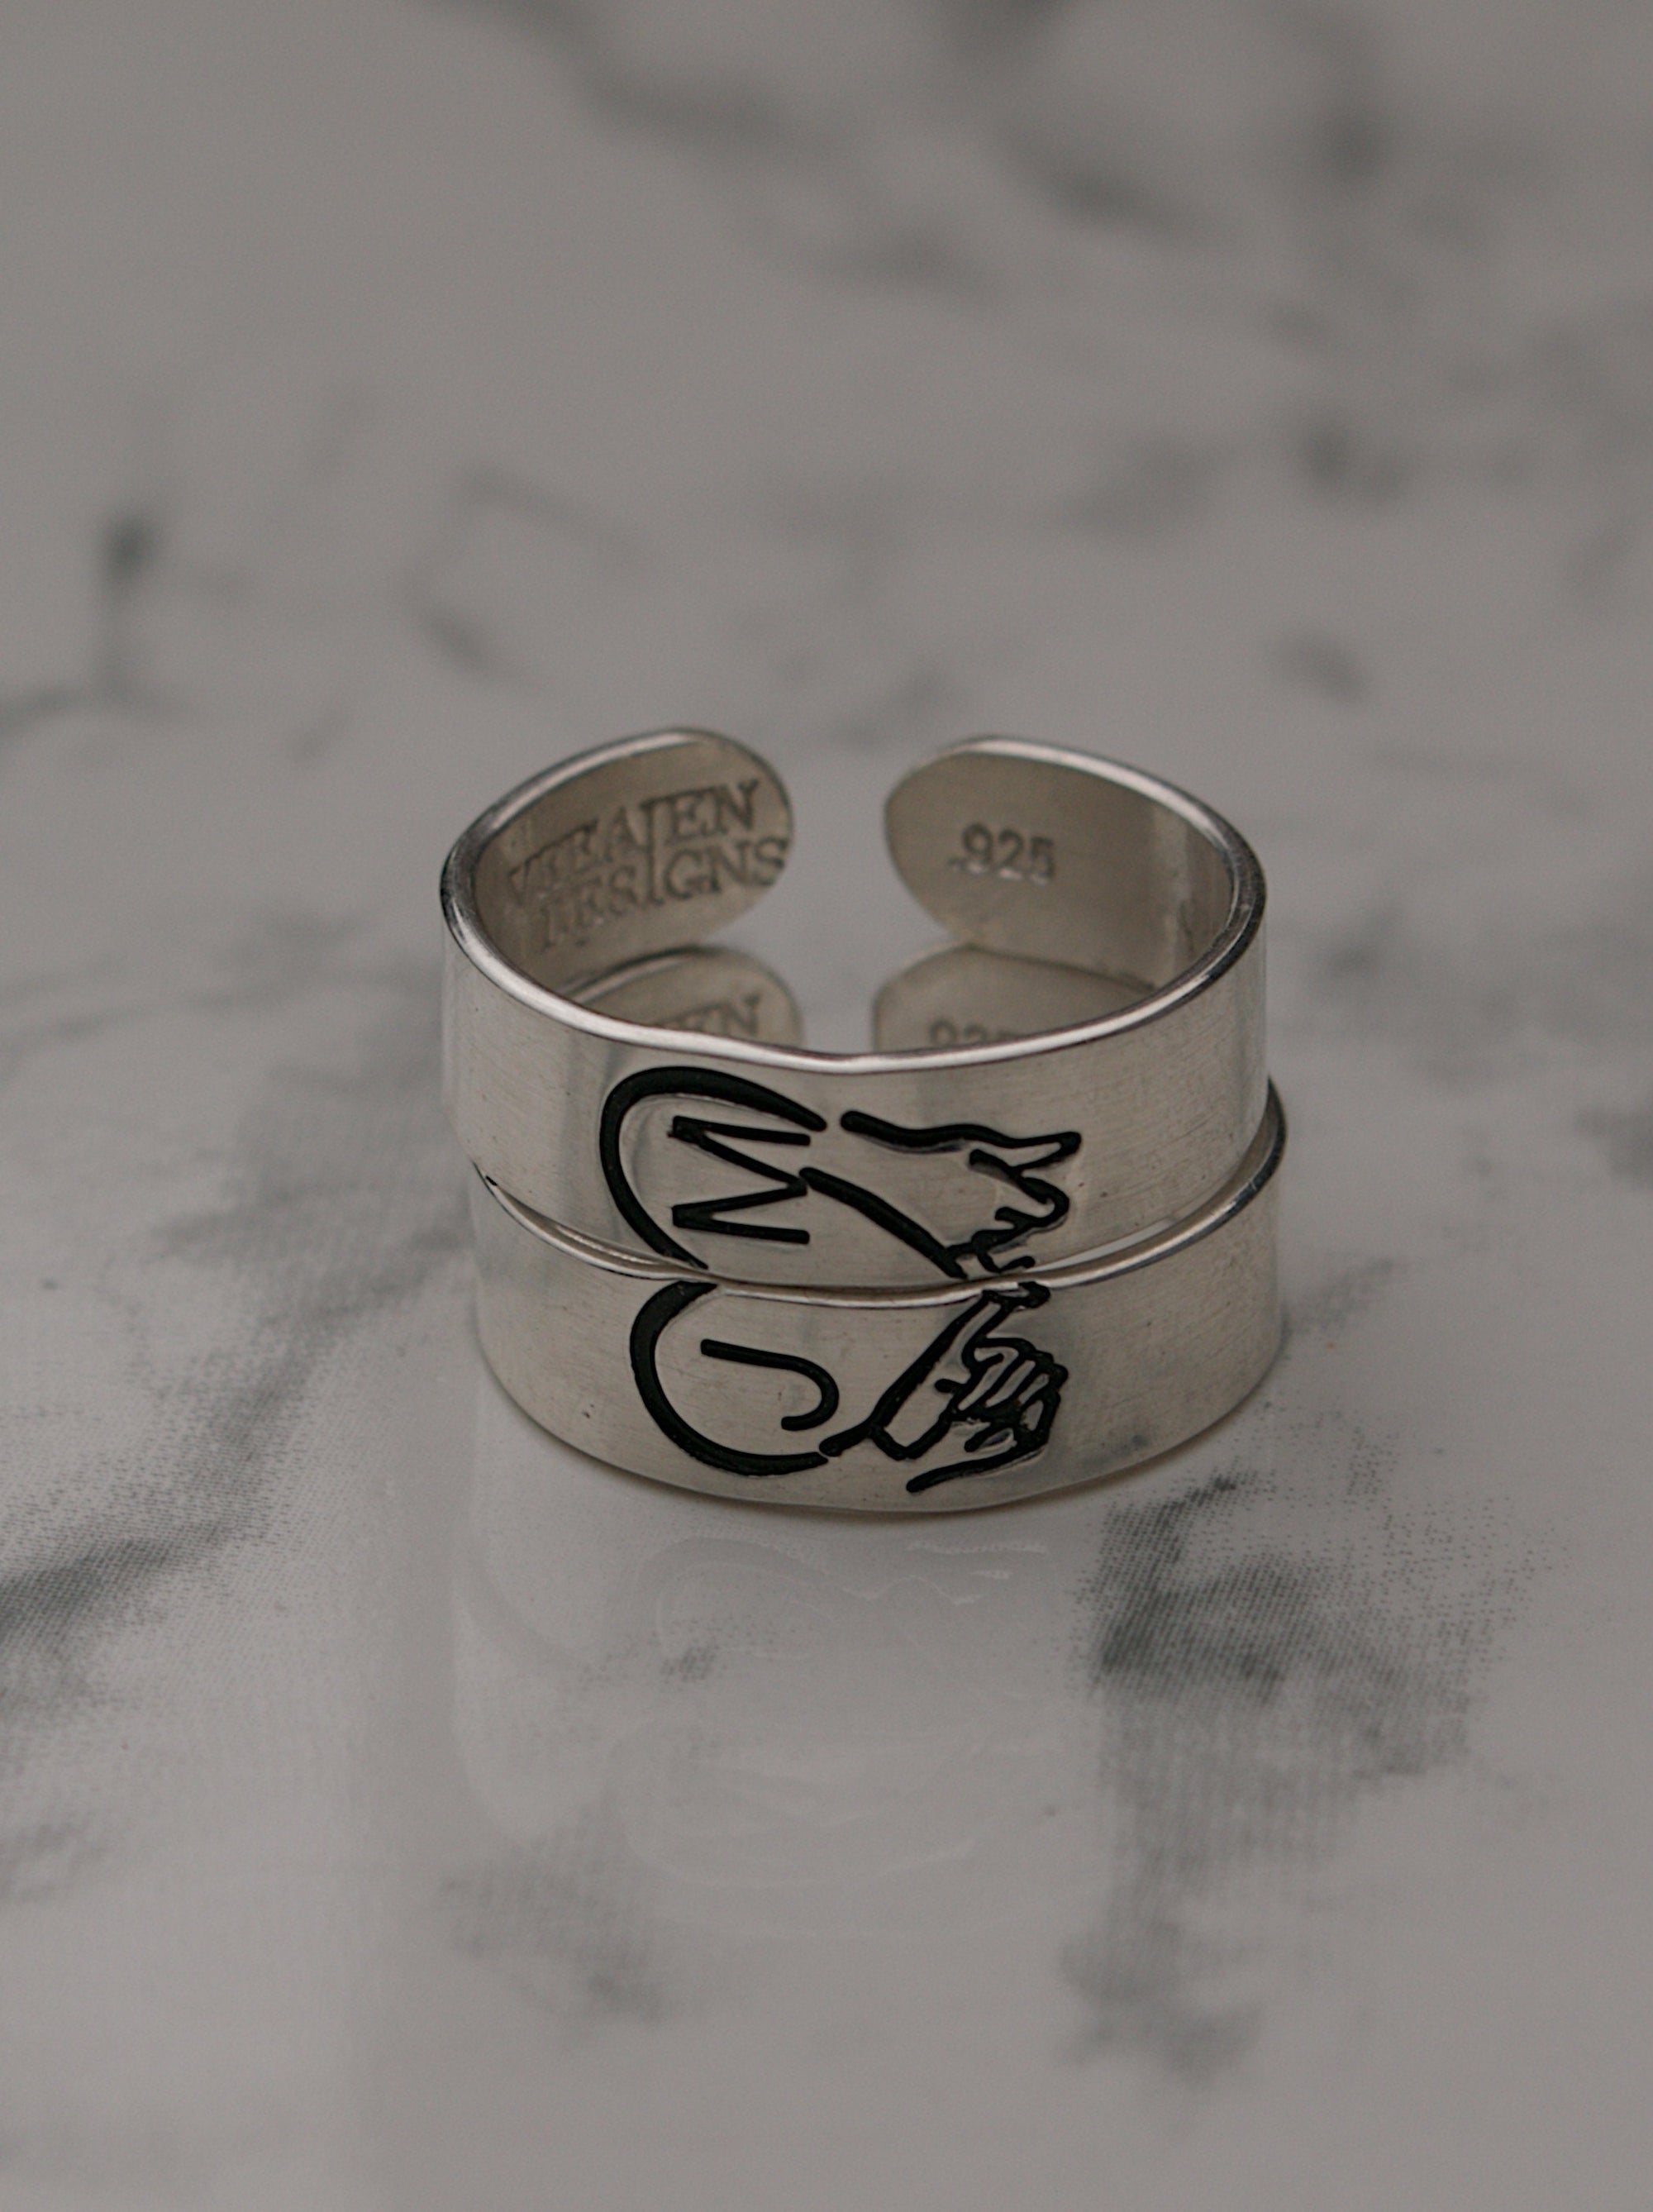 Matching Heart Ring Sets, Couples Heart Ring Sets, Promise Rings, Love Rings,  Valentine's Day/Anniversary/Christmas Gifts for a Couple - GetNameNecklace